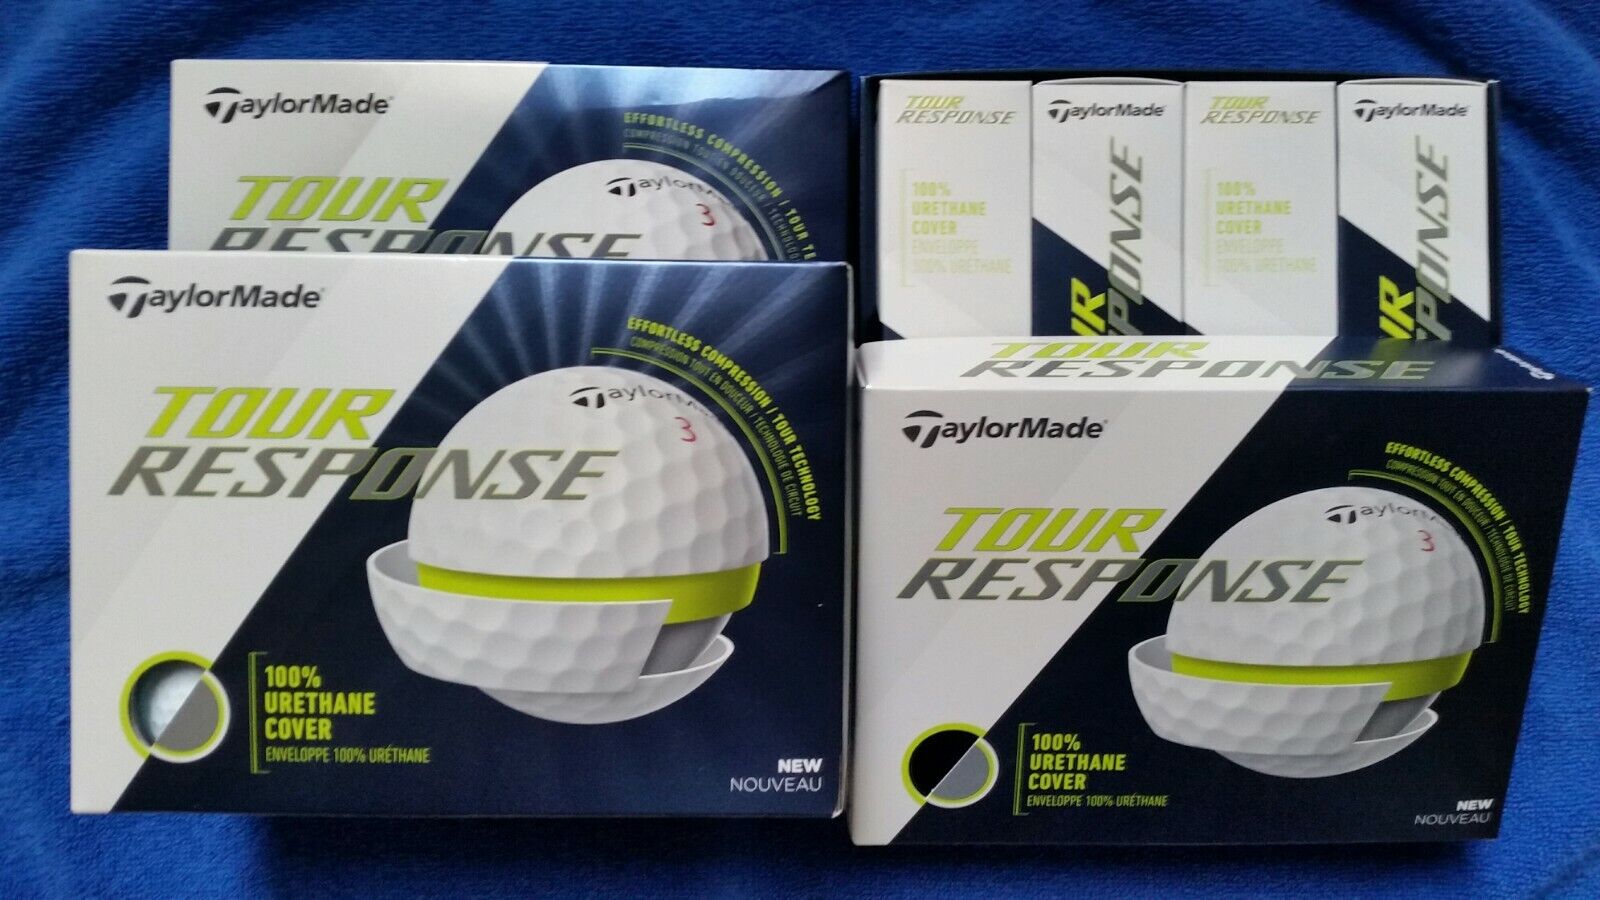 3 Brand New Boxes of TaylorMade Tour Response Golf Balls